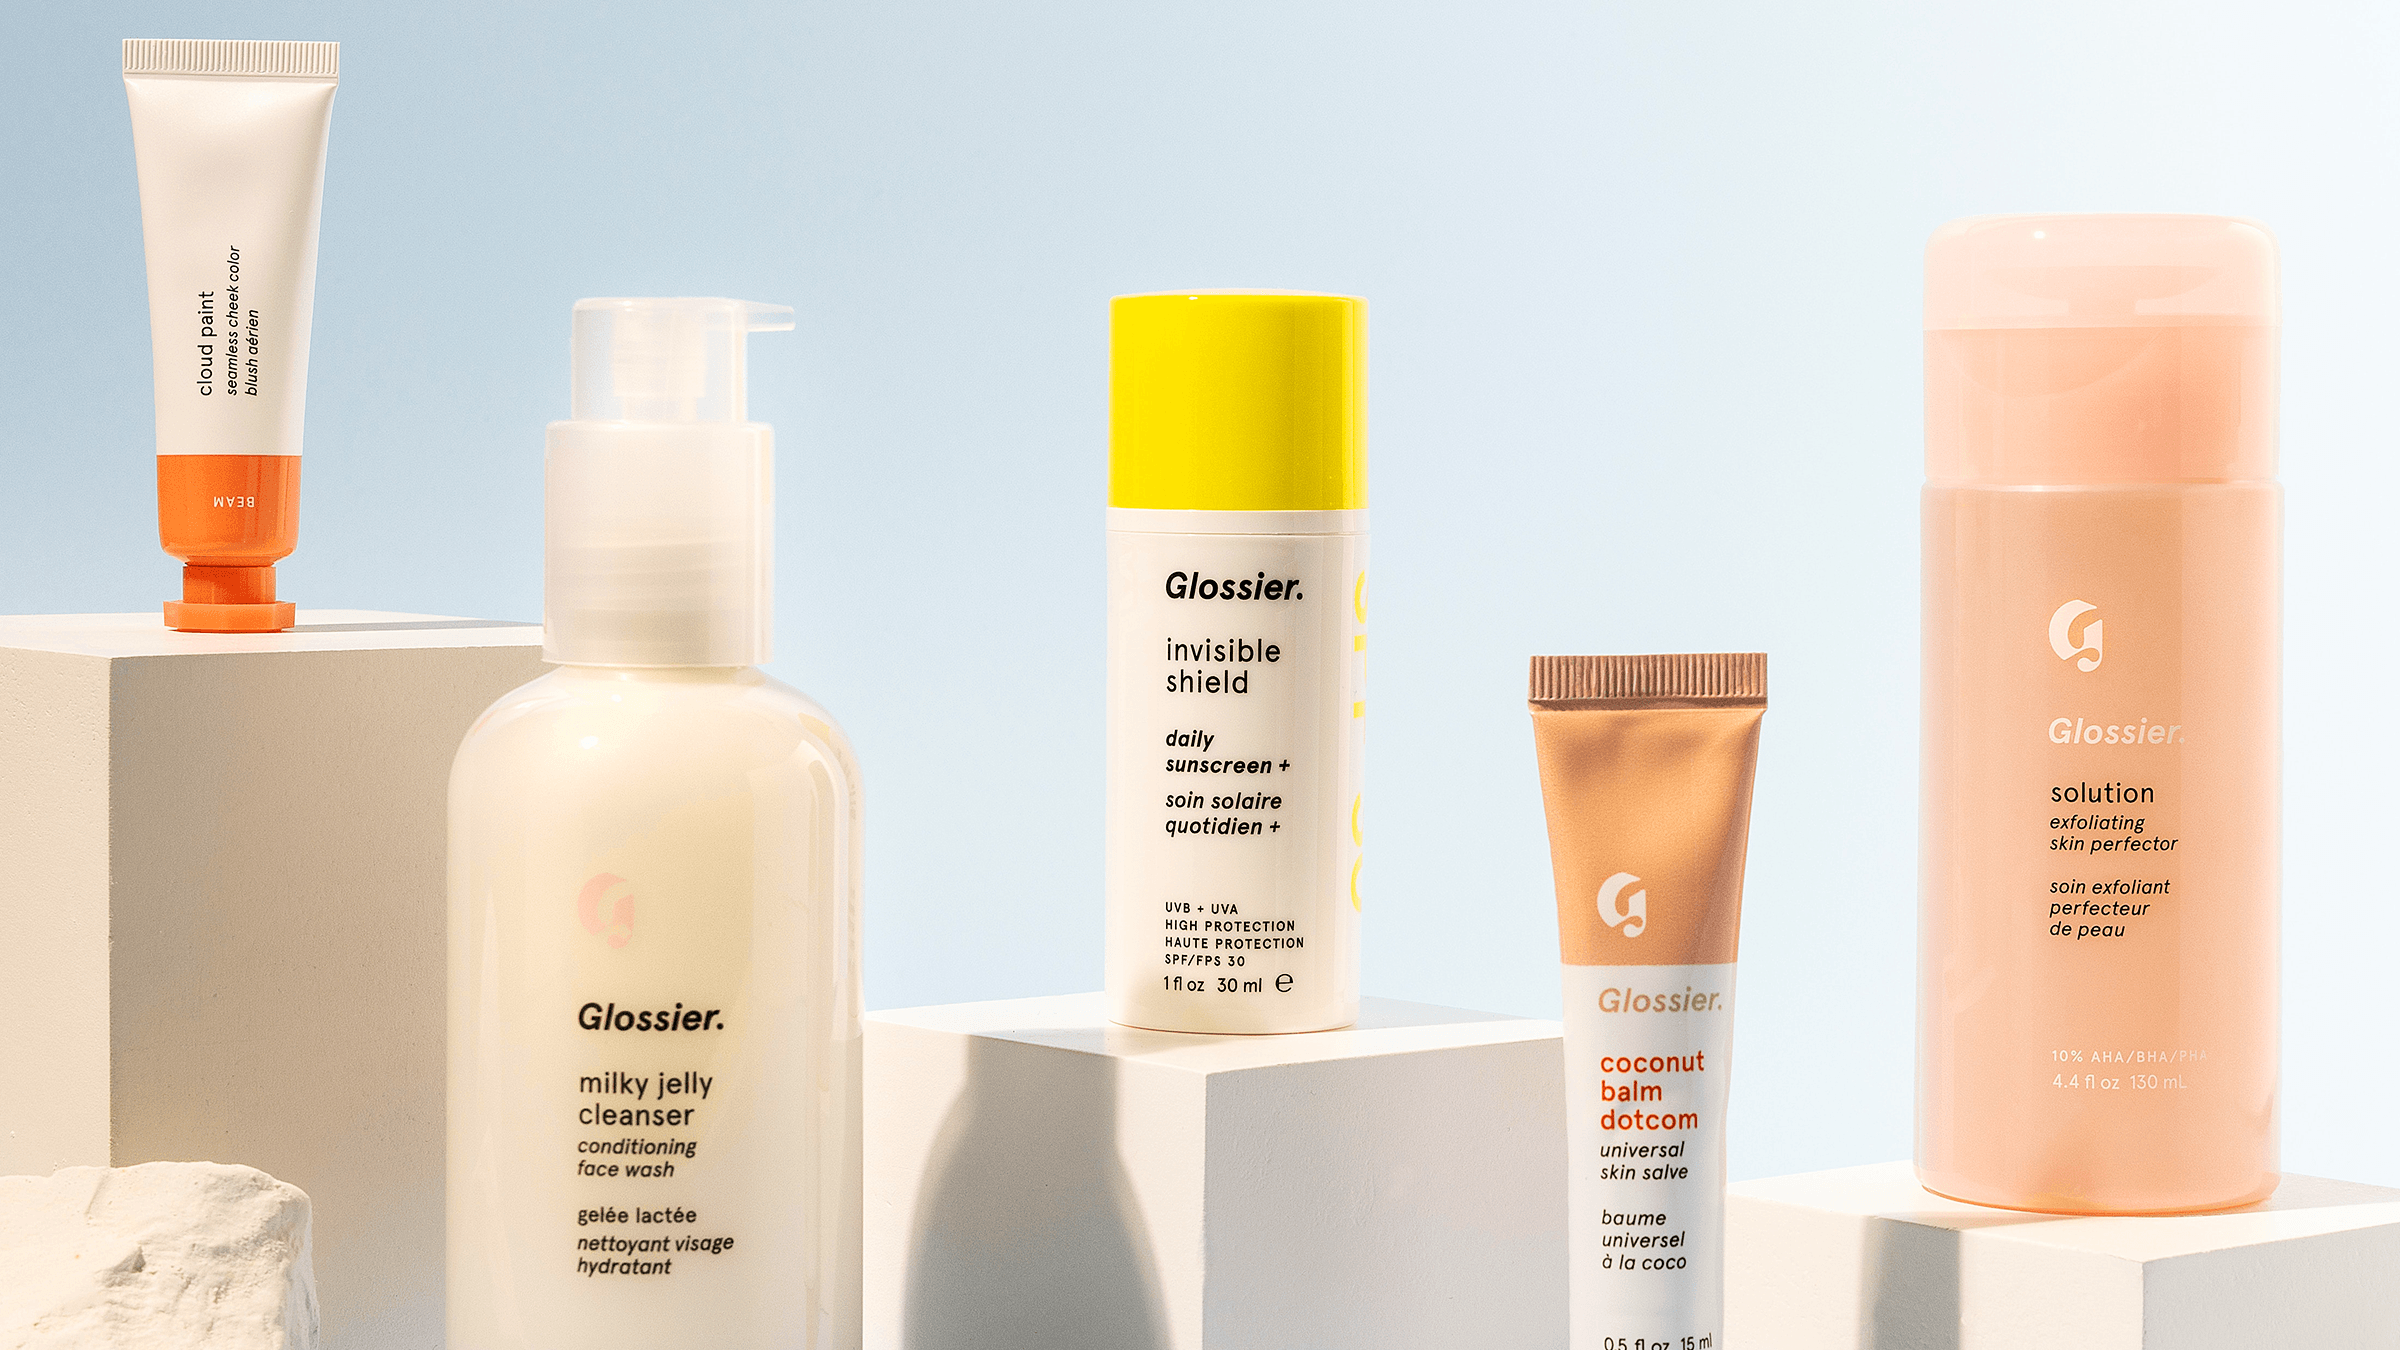 A range of Glossier beauty products